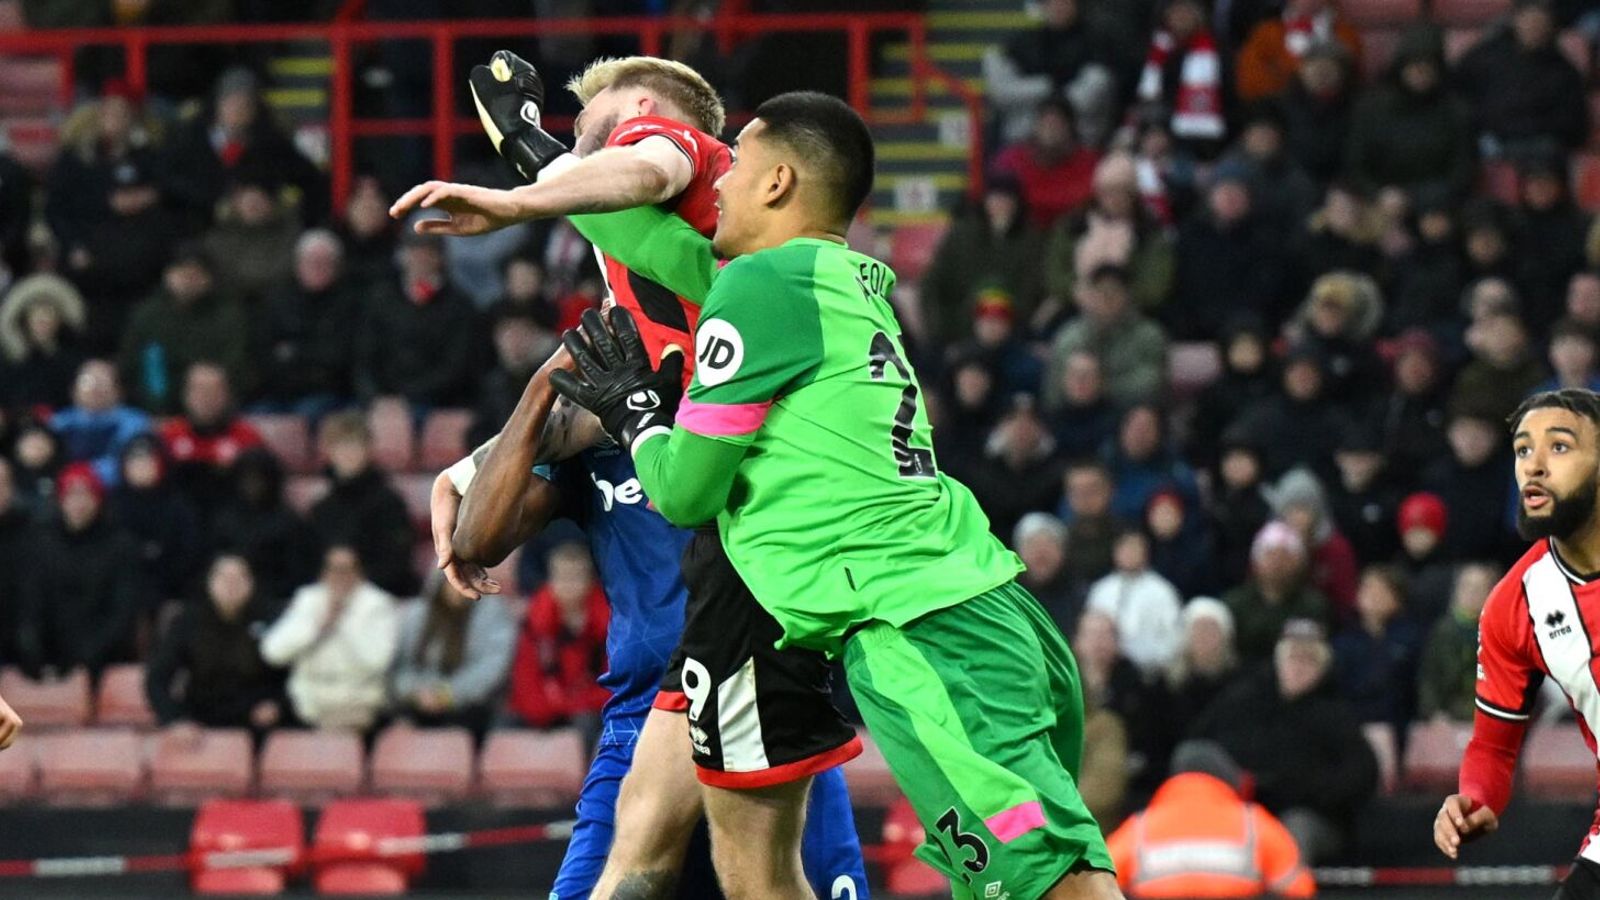 Alphonse Areola concedes a penalty after being adjudged to have fouled Oliver McBurnie